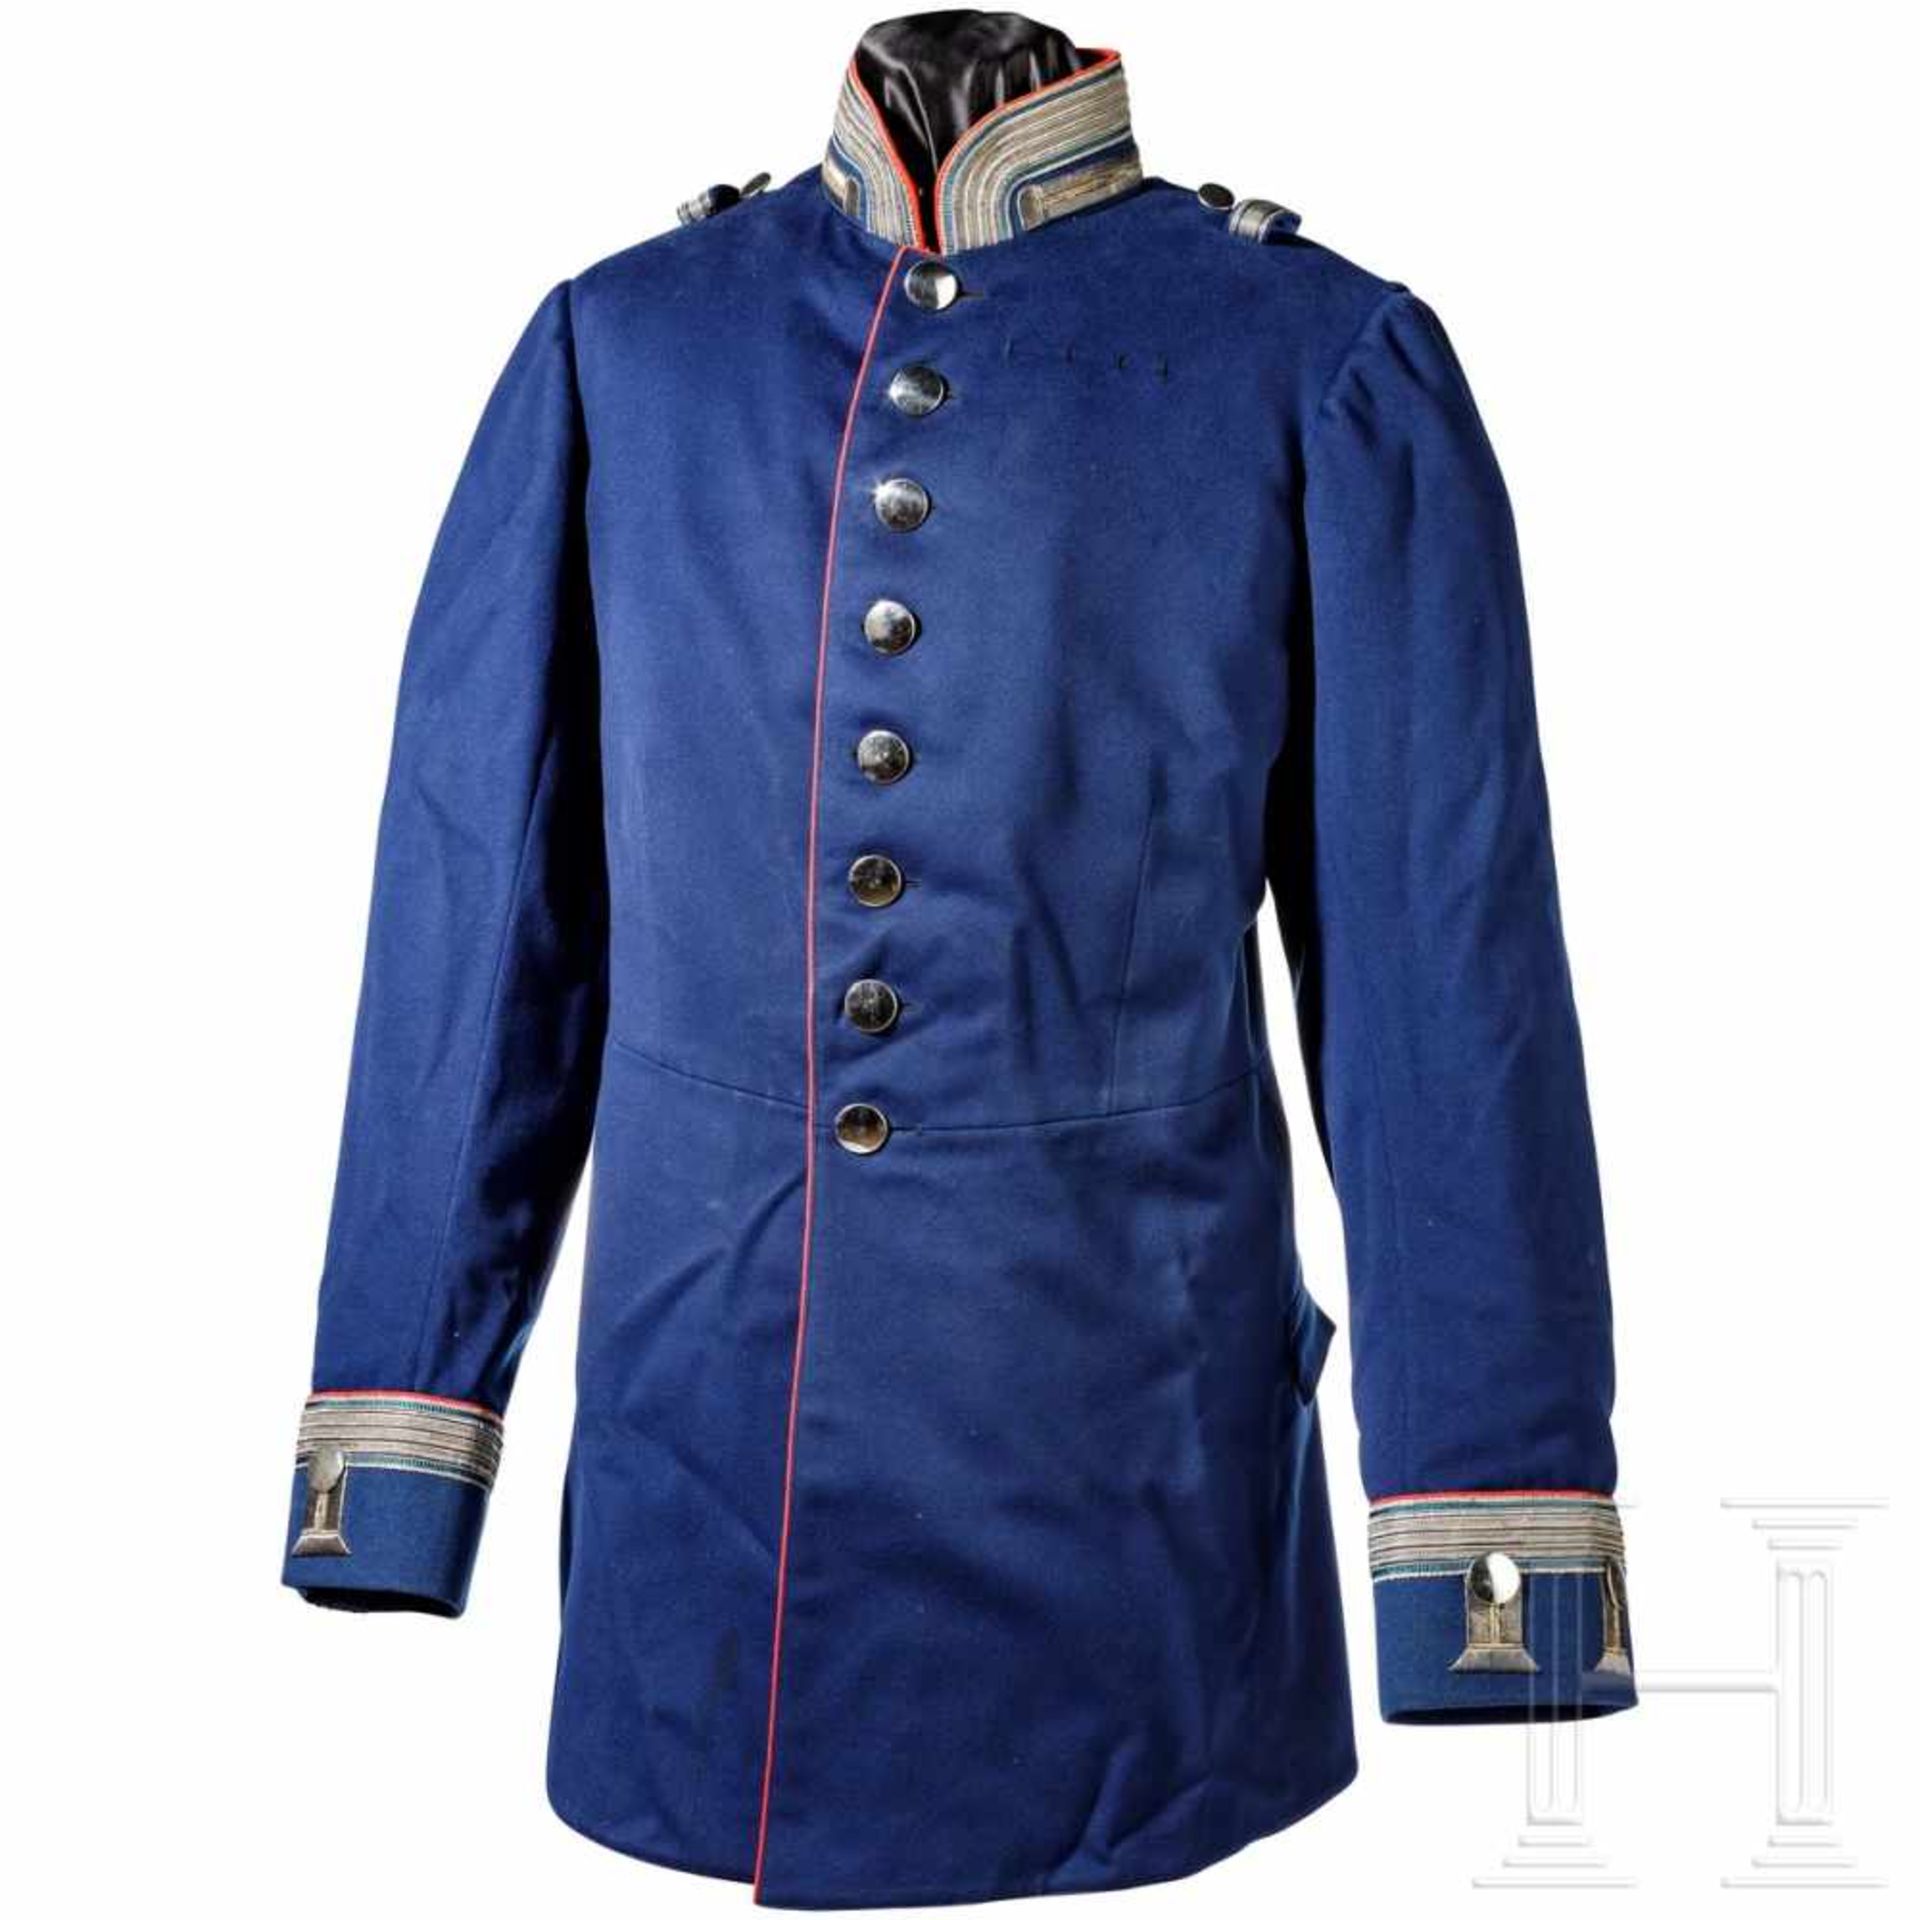 A tunic for officers in the Guard Cuirassier Regiment and a plate, circa 1900Feines, dunkelblaues